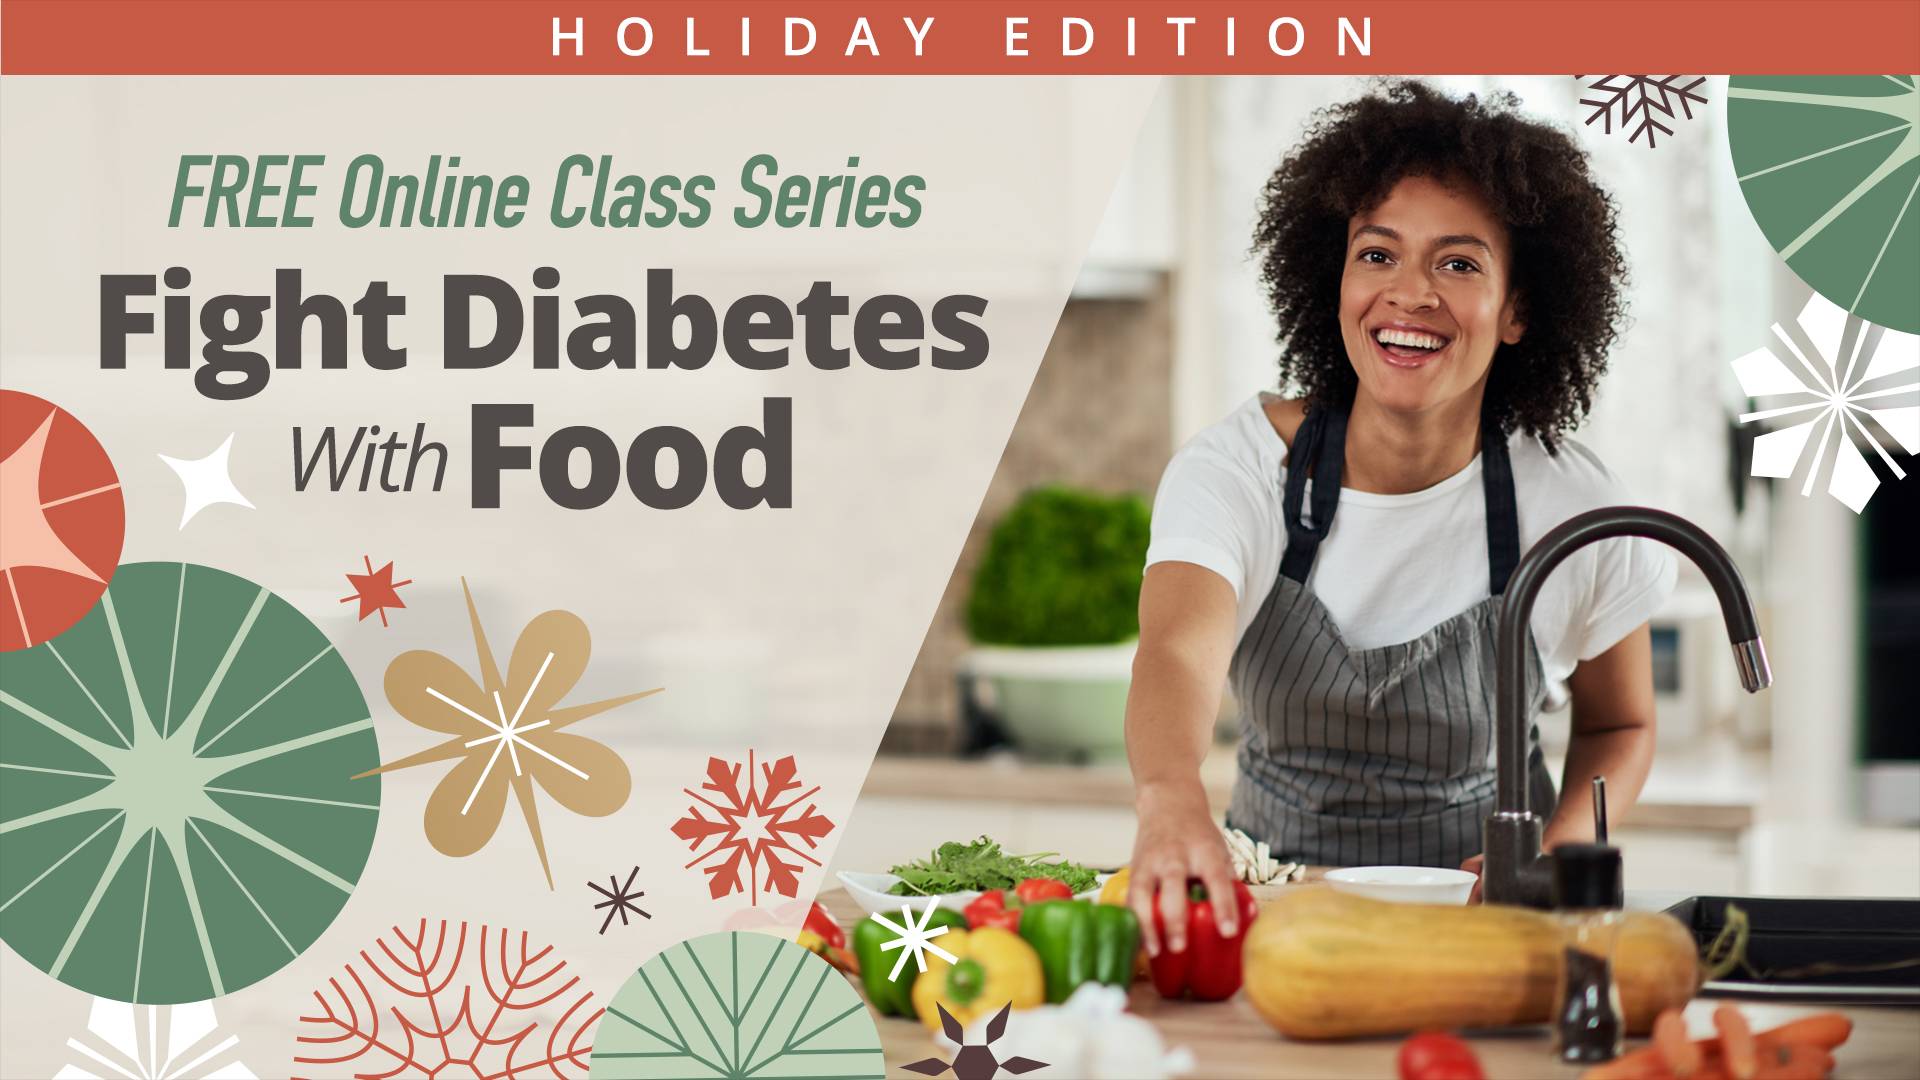 Join us for the Fight Diabetes with Food Holiday Celebration!